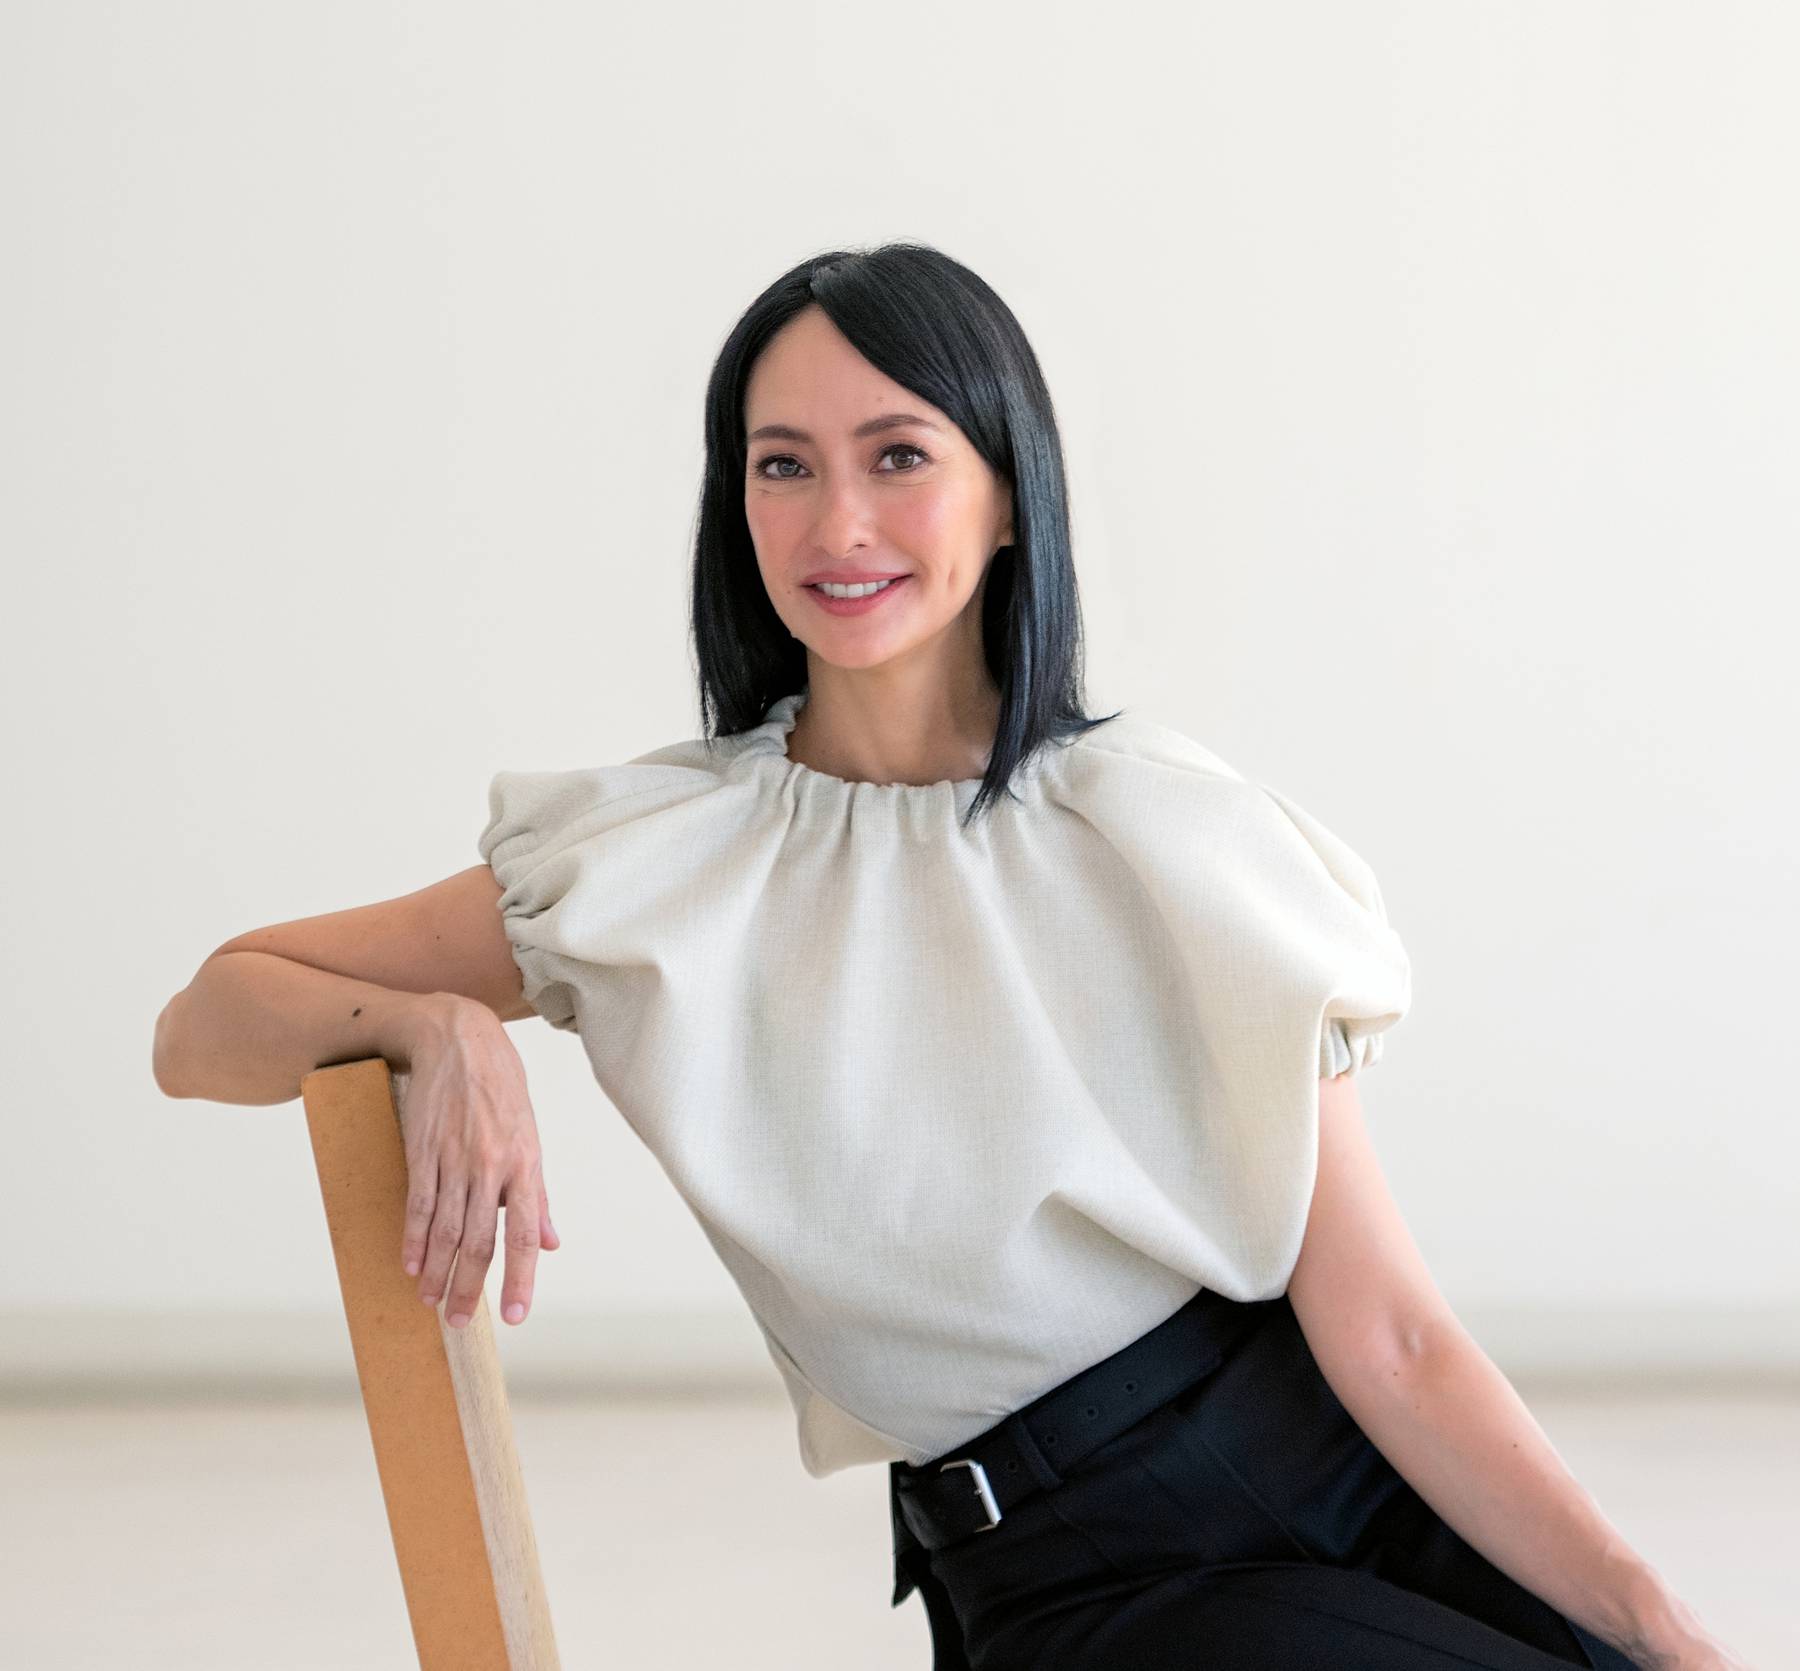 Accessories designer Bea Valdes is the new editor-in-chief of Vogue Philippines.